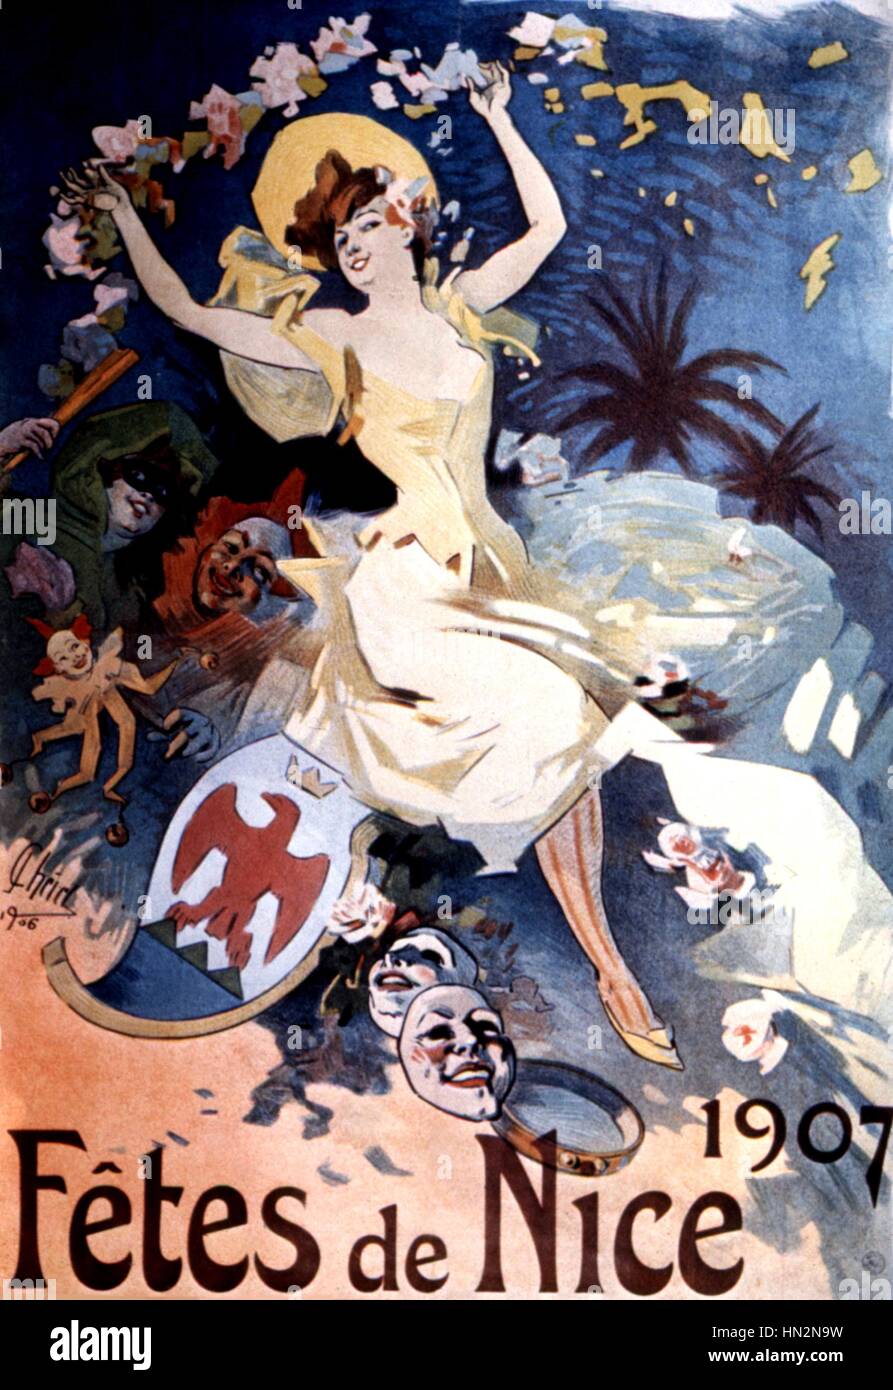 Advertising poster for the Festivities at Nice, 1907 1836-1932 Jules Cheret Musee Cheret Stock Photo